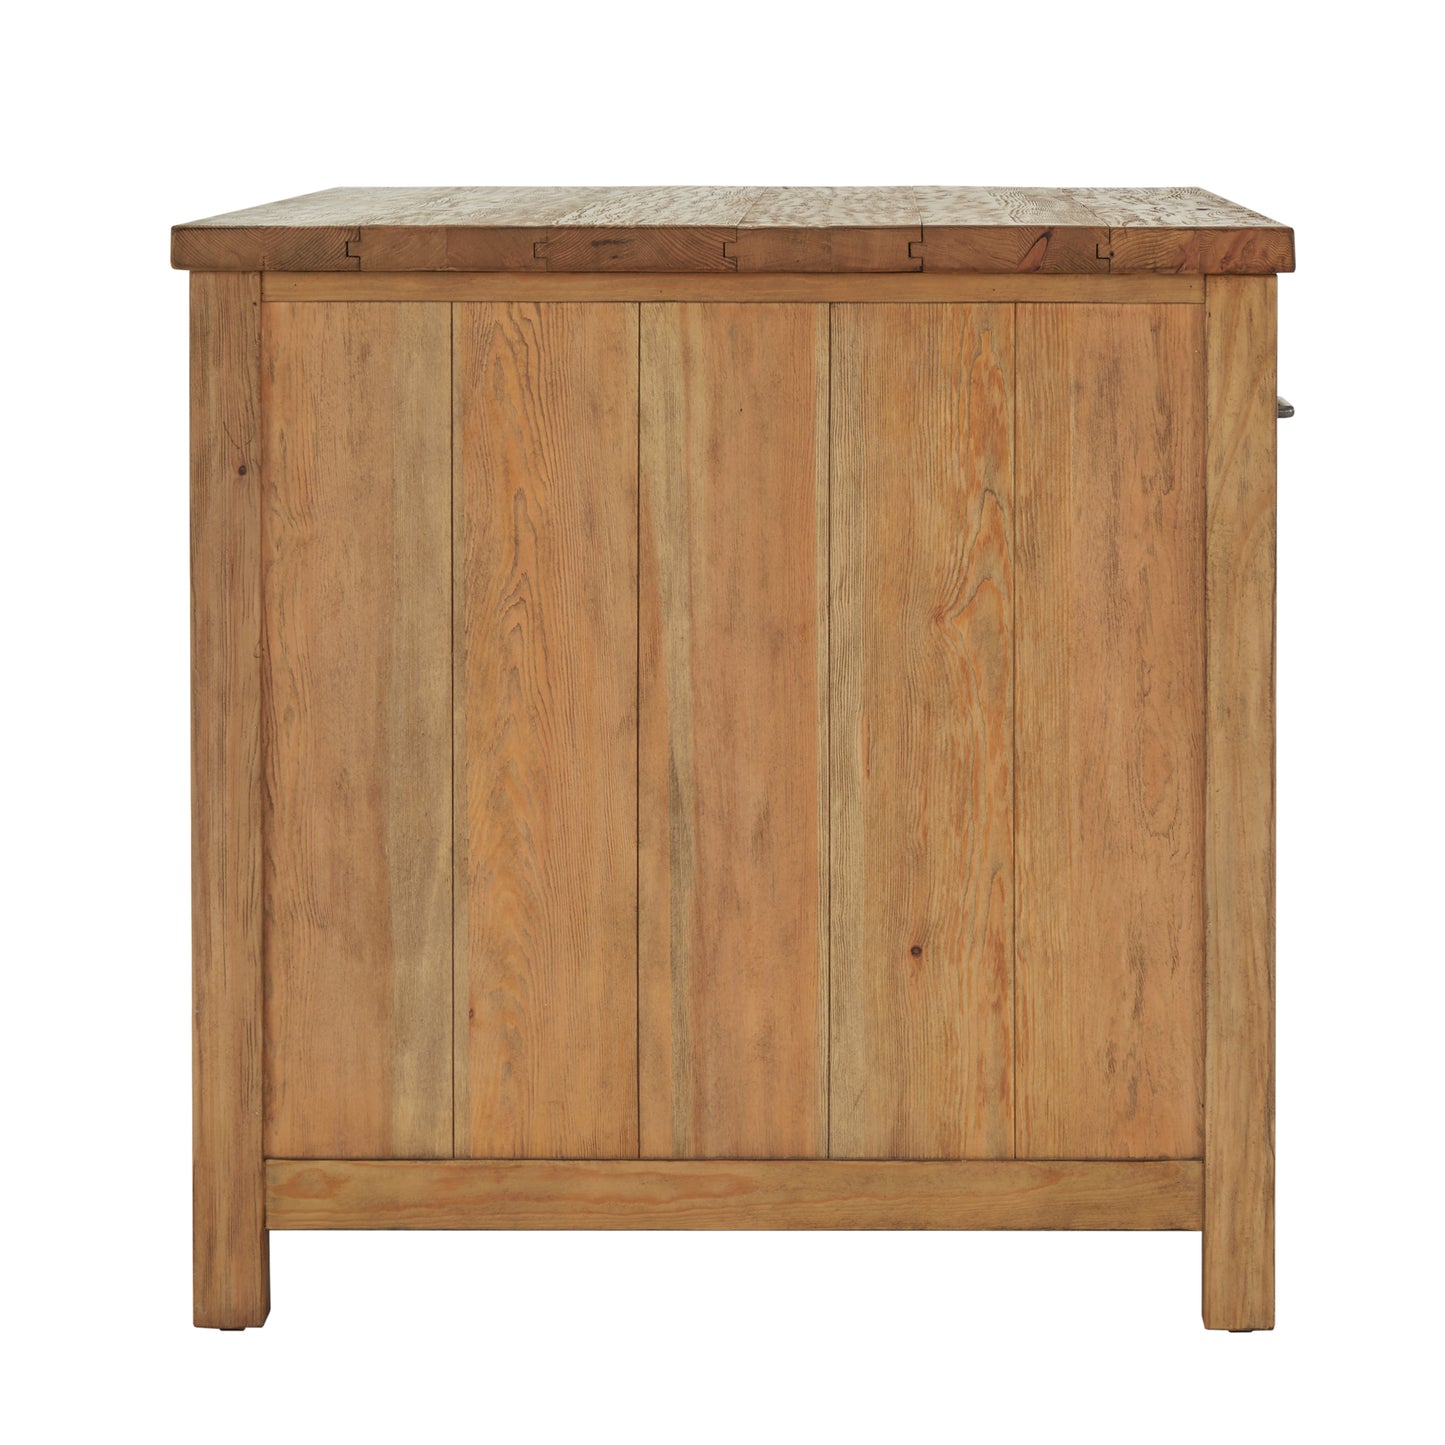 Reclaimed Look Extendable Kitchen Island - Natural Finish, Reclaimed Look Top